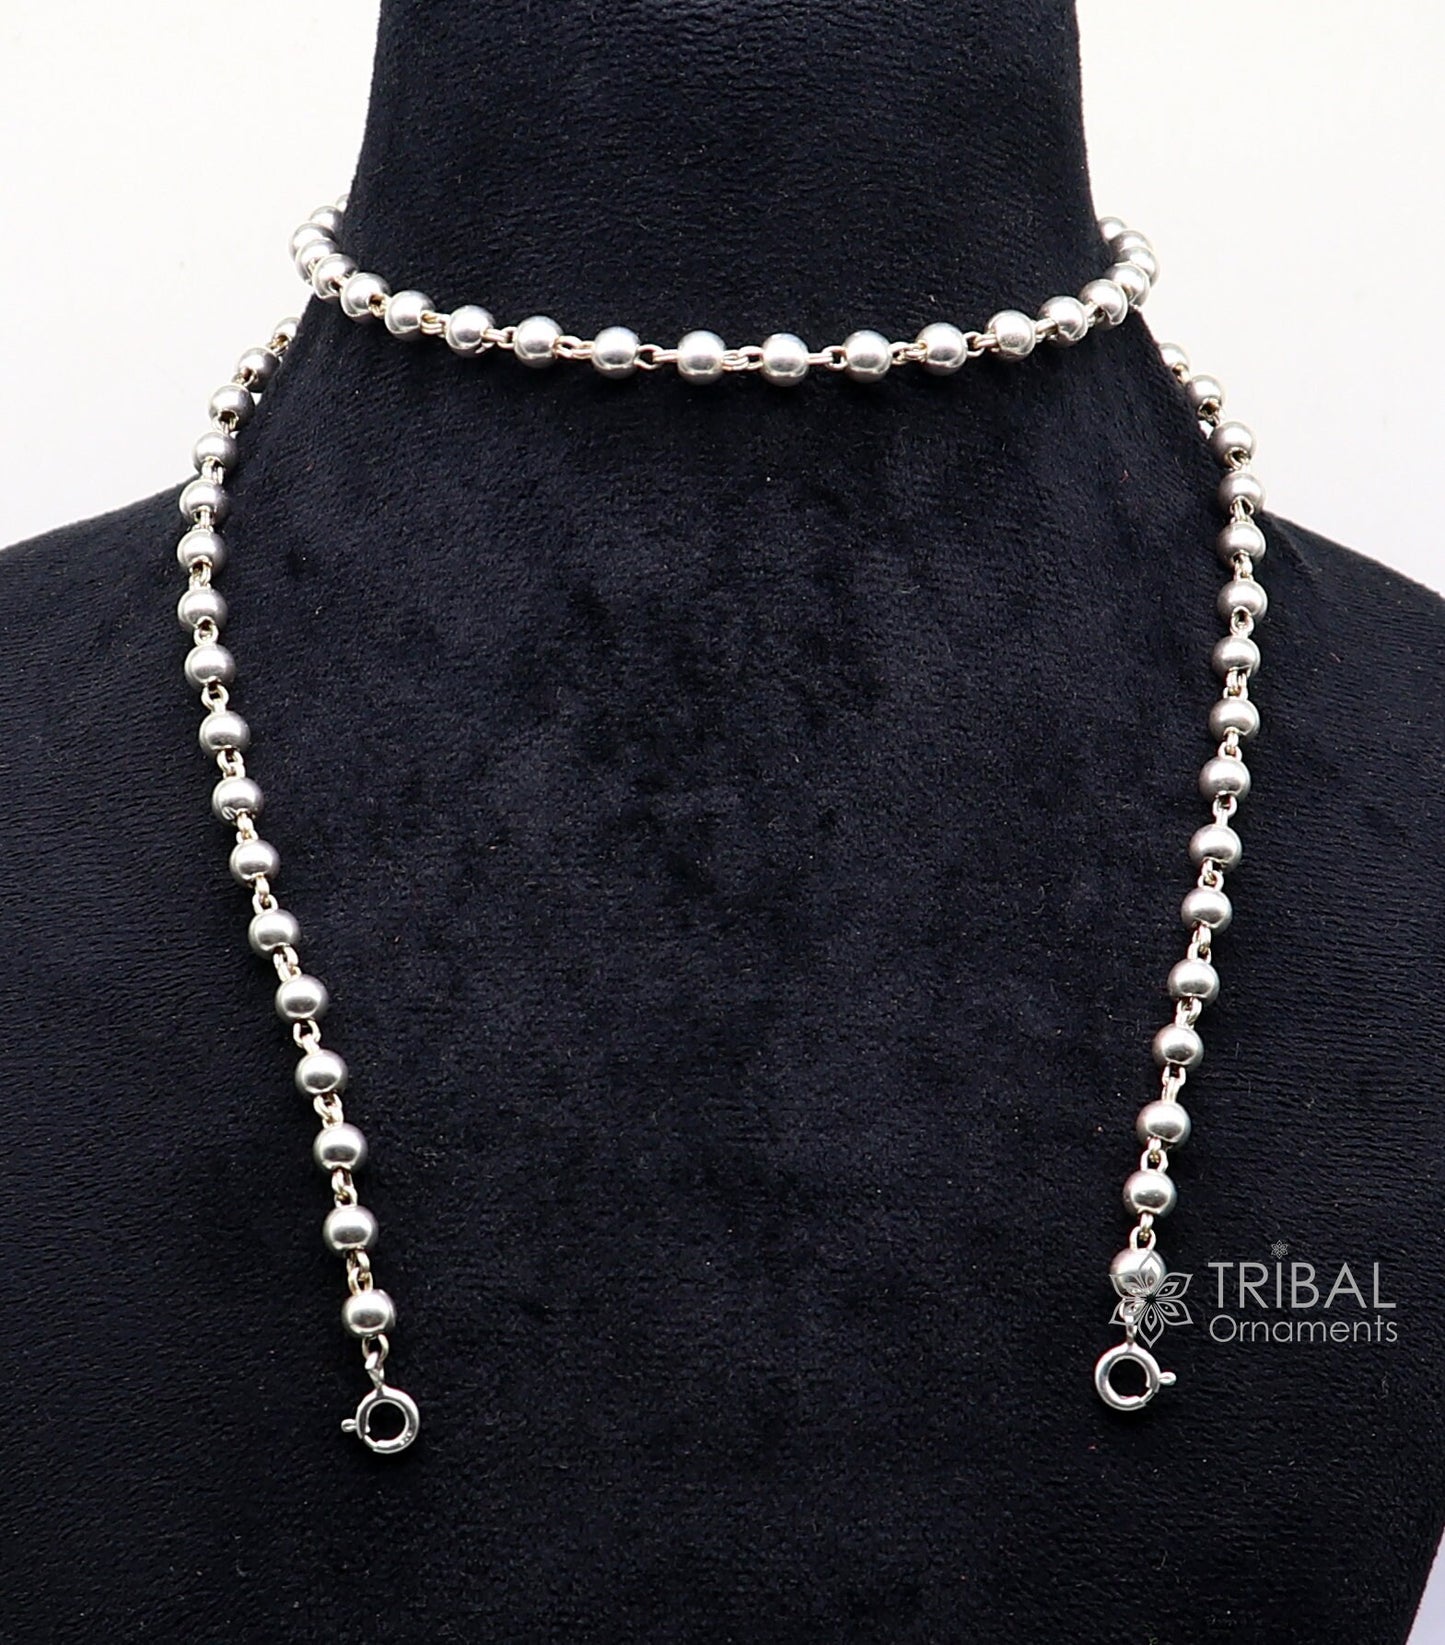 925 sterling silver beaded chain with locking system for necklace of any pendant, best beaded necklace string for all type of pendant ch513 - TRIBAL ORNAMENTS